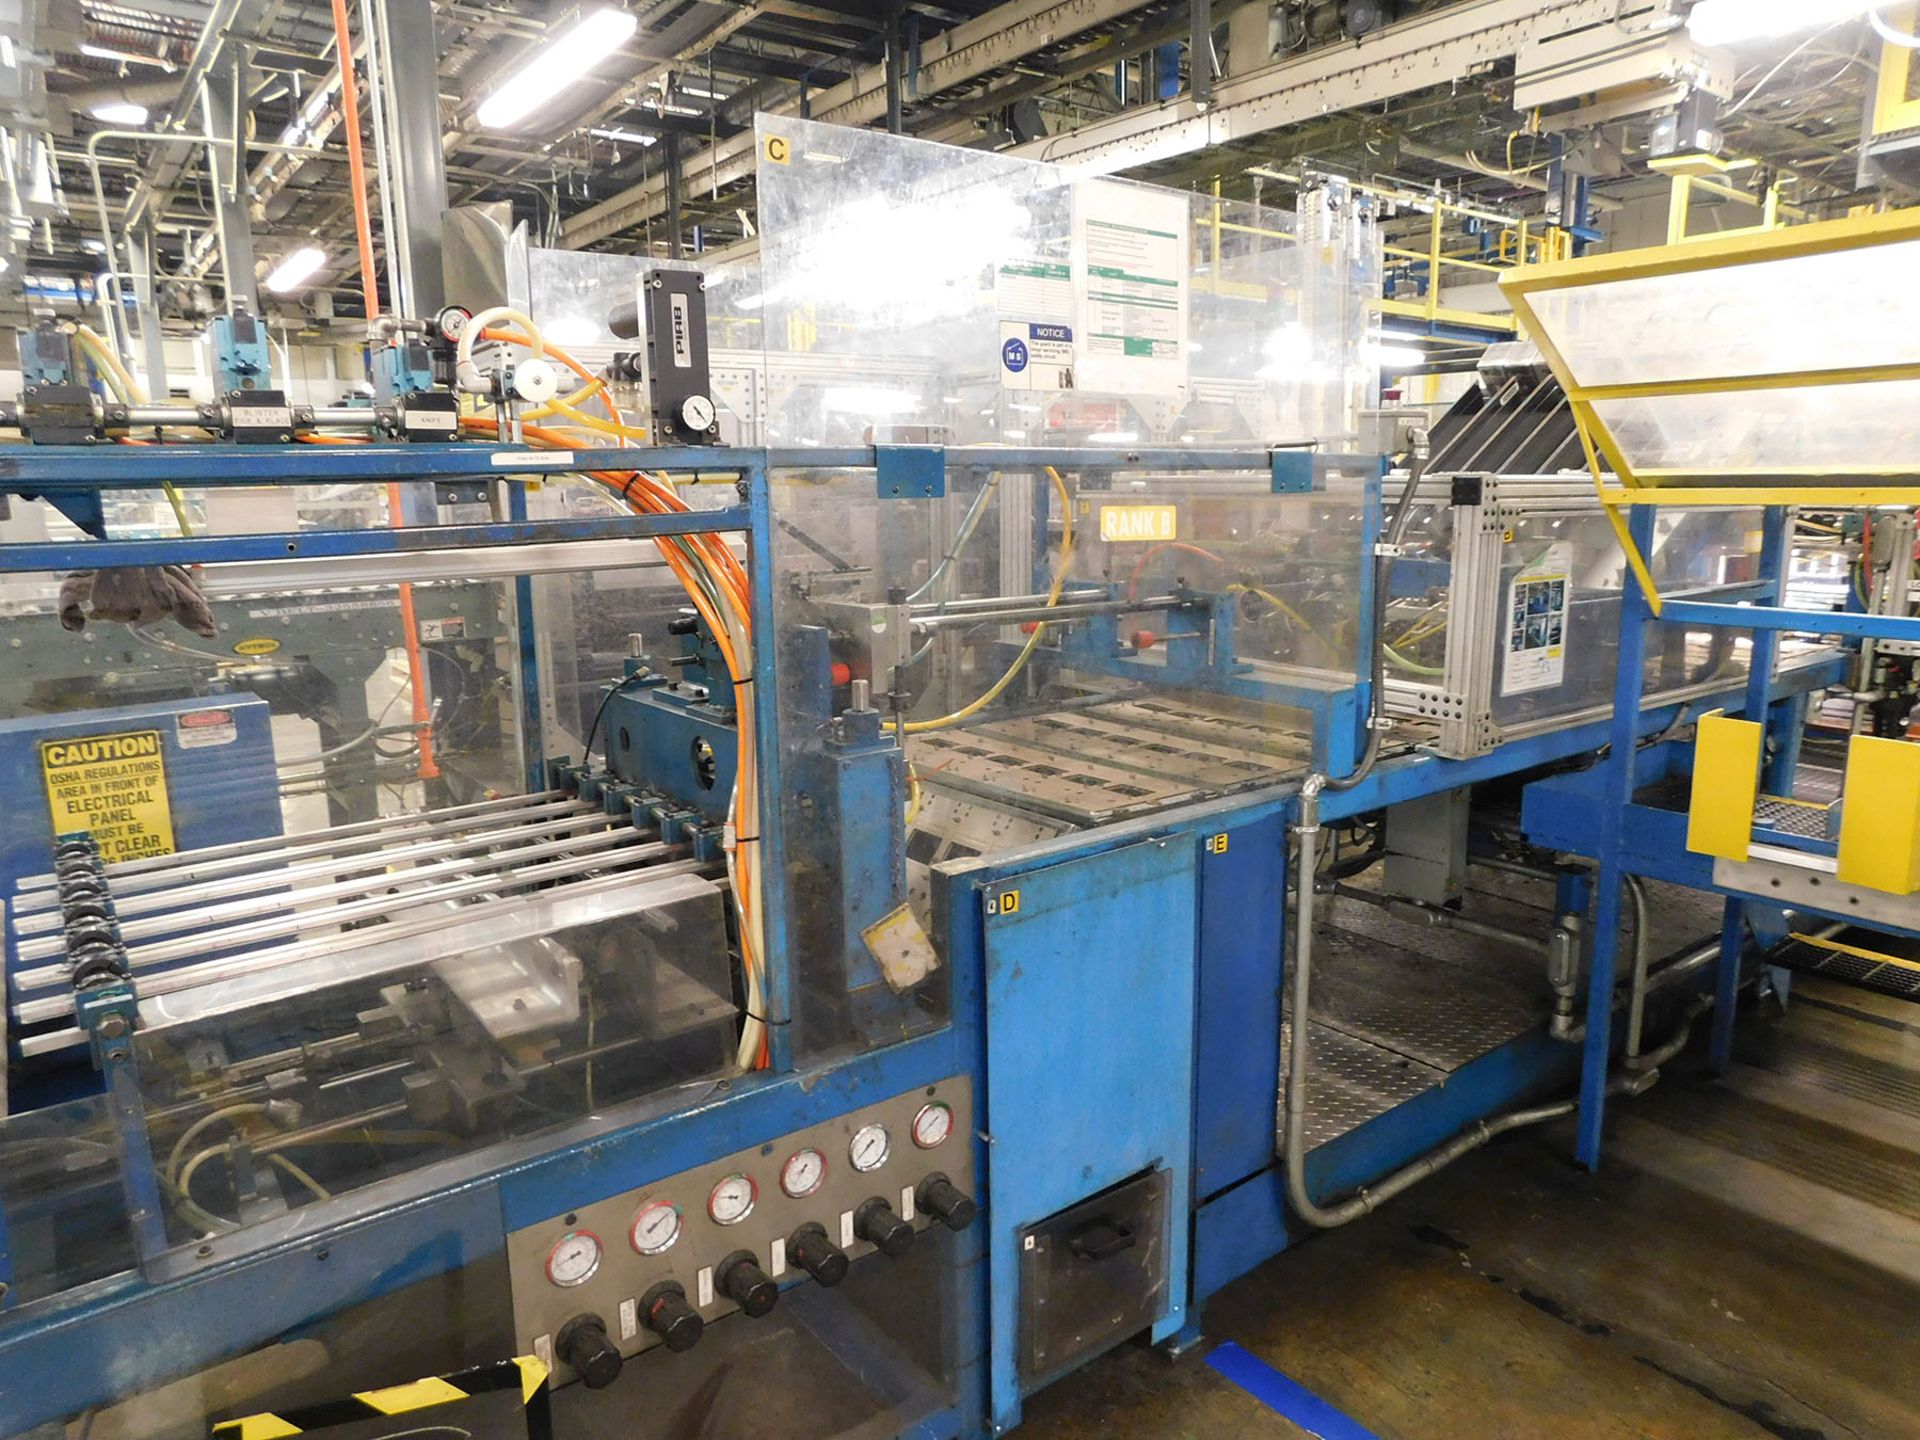 AA DURACELL BLISTER PACK LINE WITH FOLD OVER CASE PACKER, MOTORIZED ROLLER CONVEYOR AND ELEVATOR - Image 3 of 4